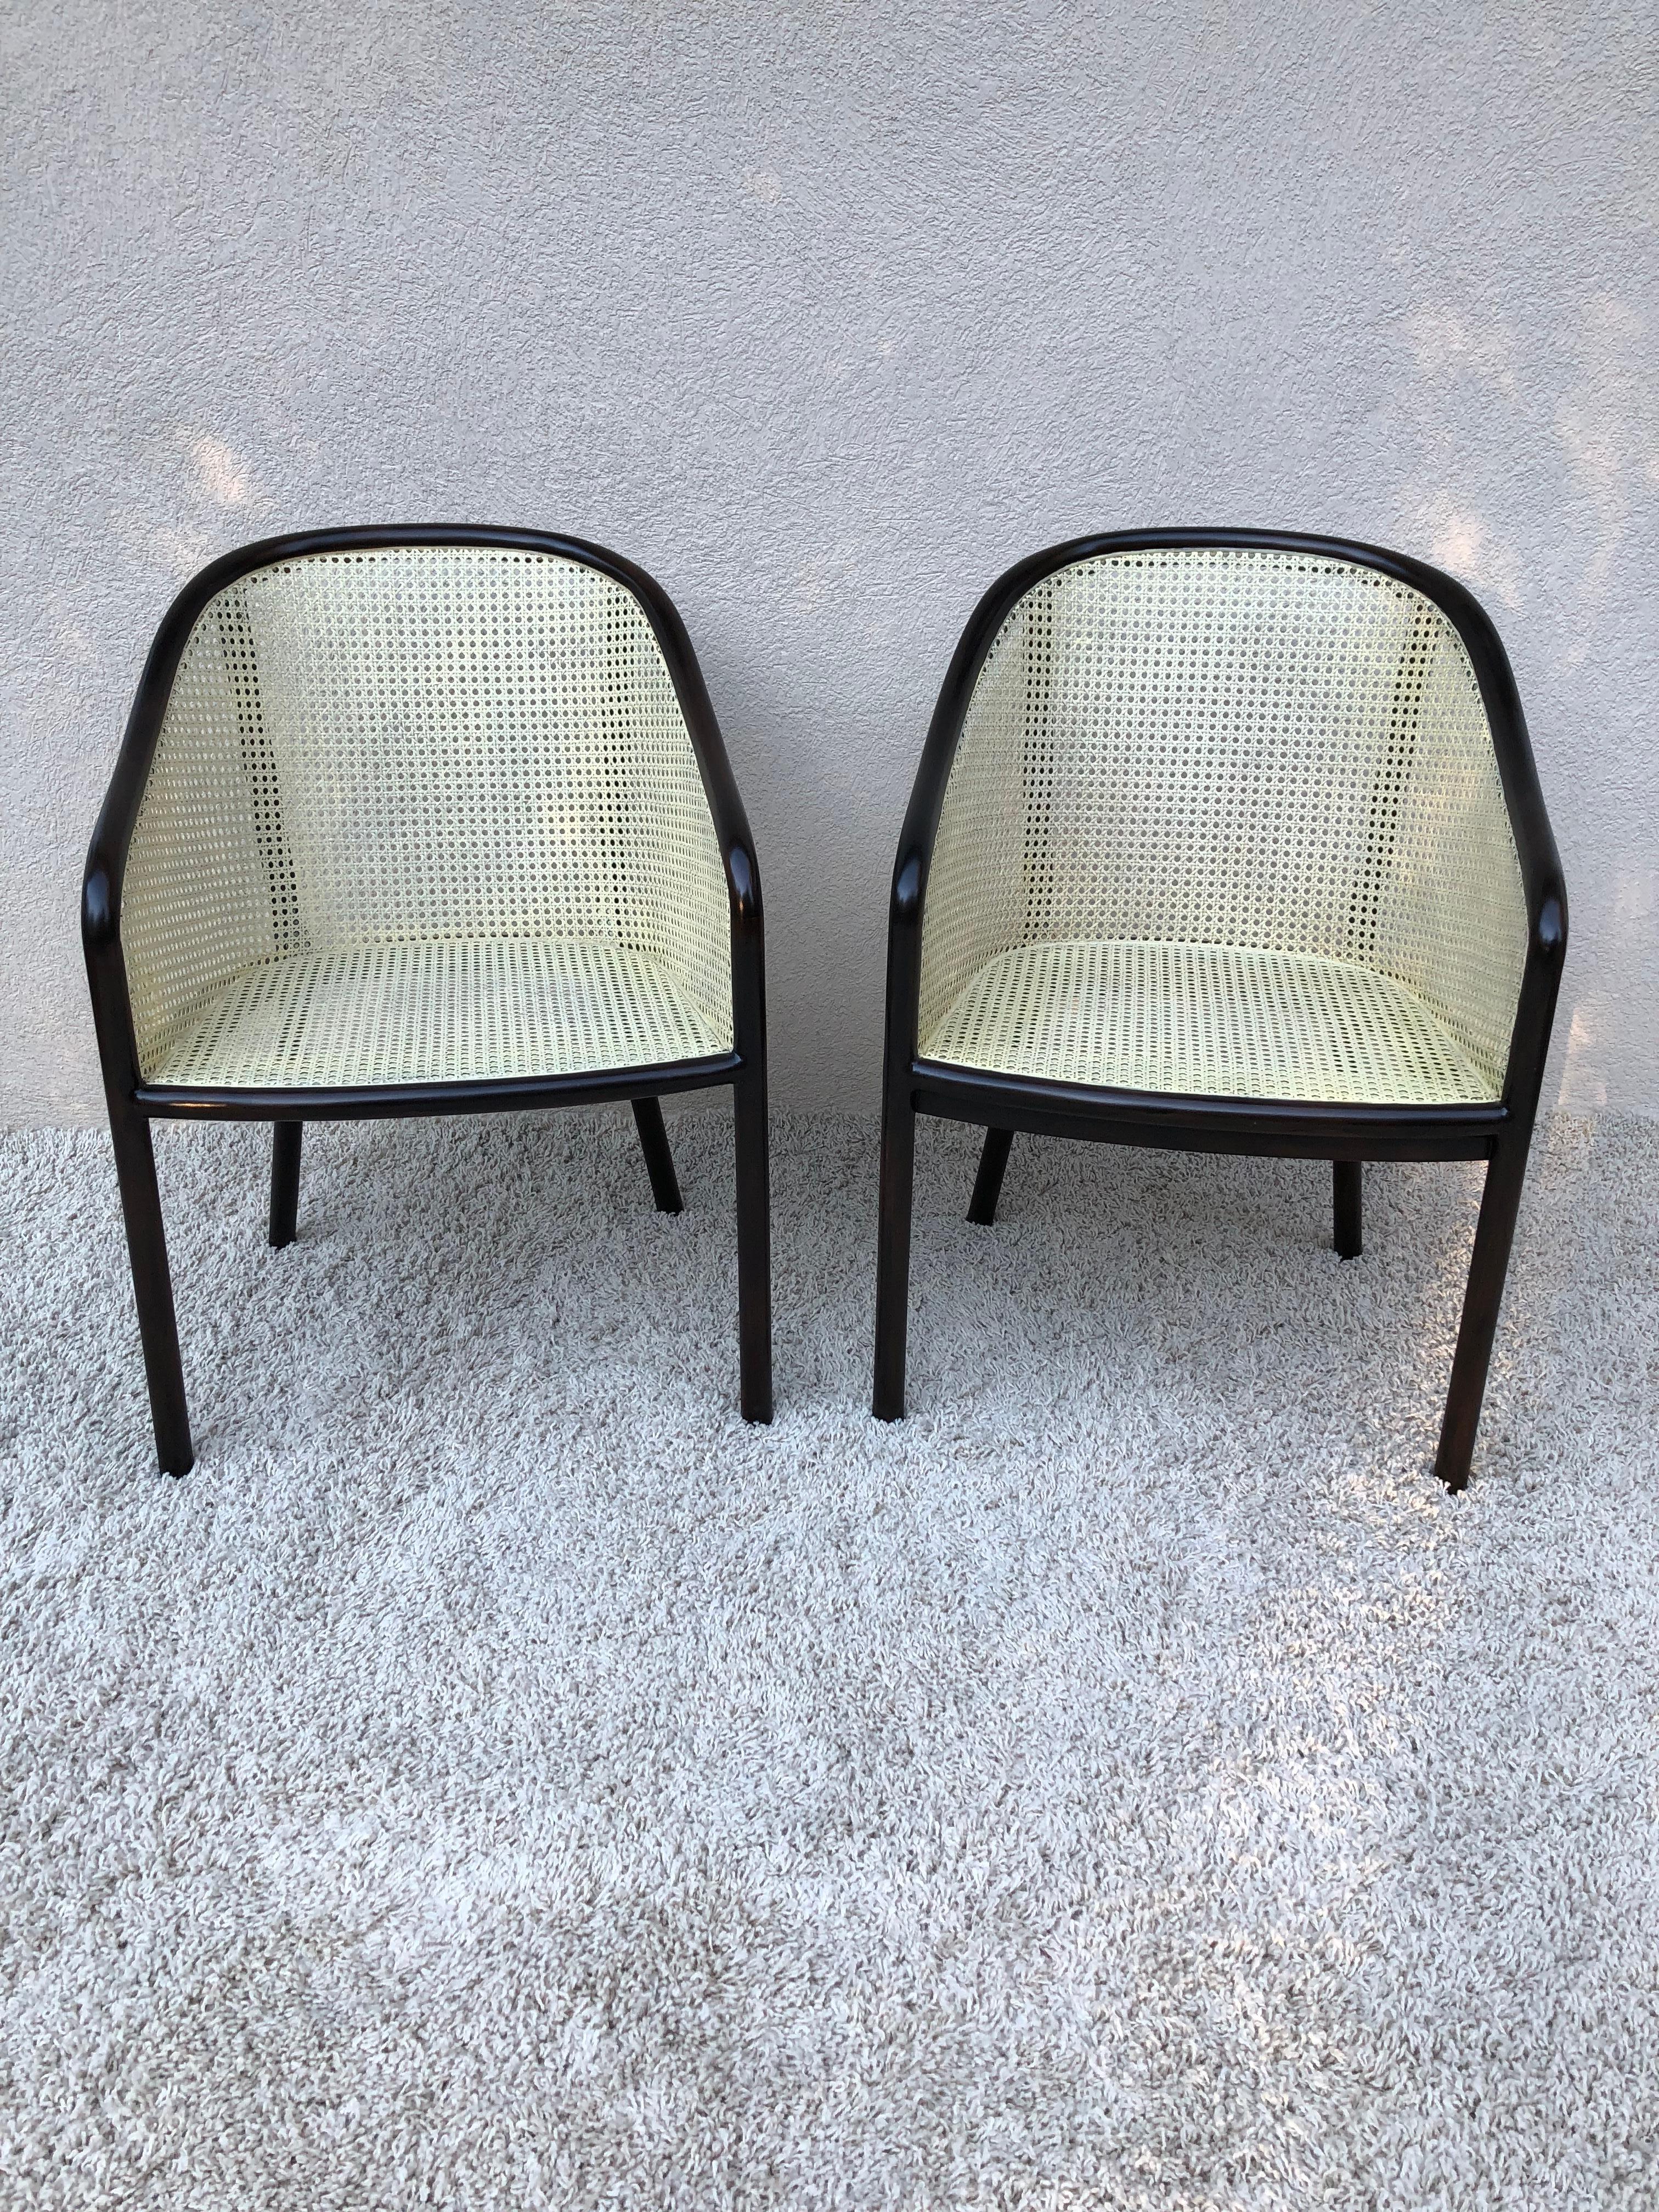 American Pair Ward Bennet Cane Lacquered Bentwood Walnut Chairs For Sale